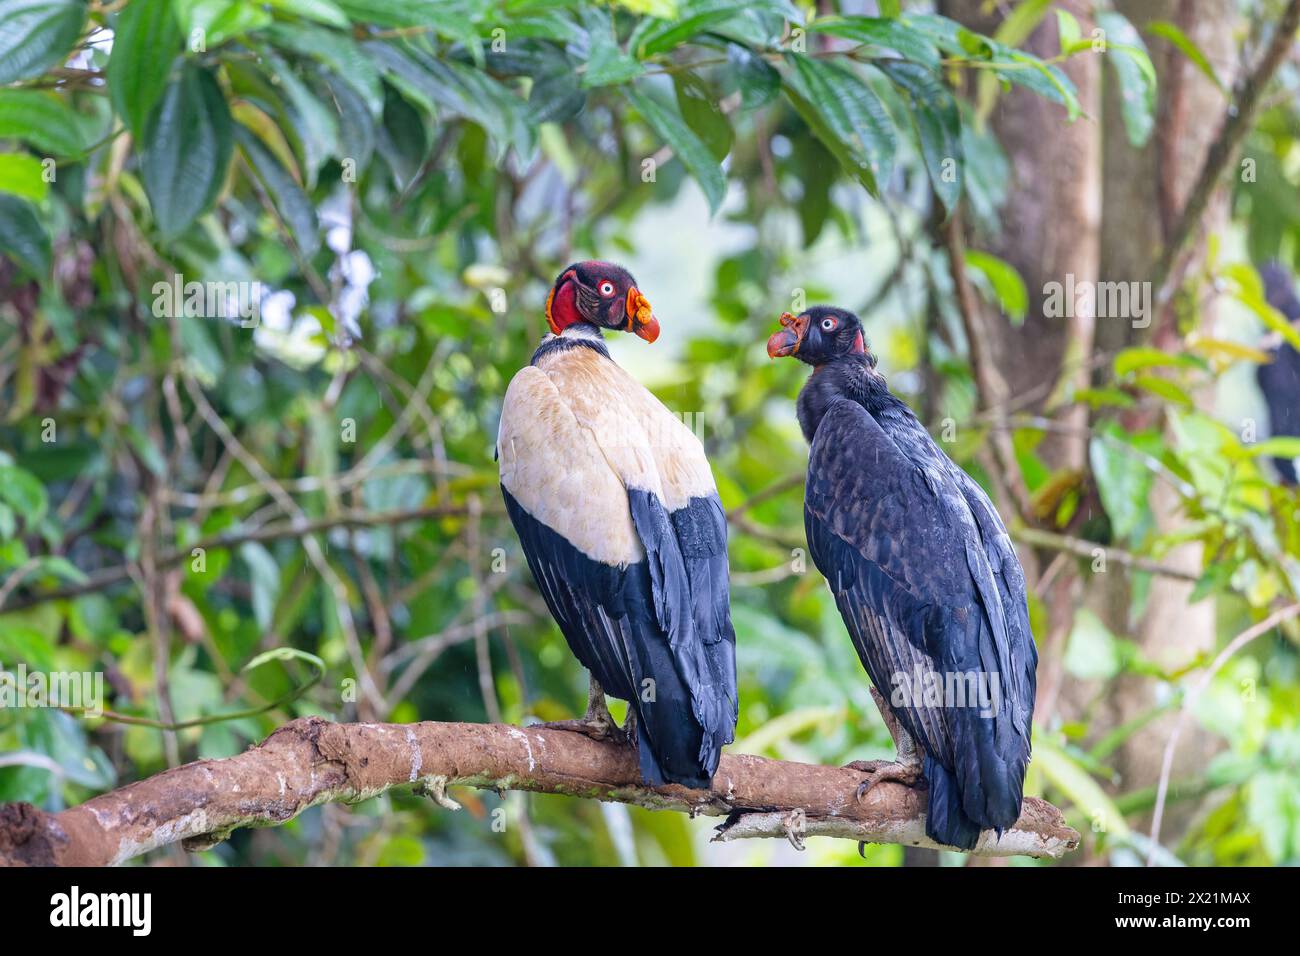 king vulture (Sarcorhamphus papa), perching together with a young bird in juvenile plumage on a branch, rear view, Costa Rica, Boca Tapada Stock Photo